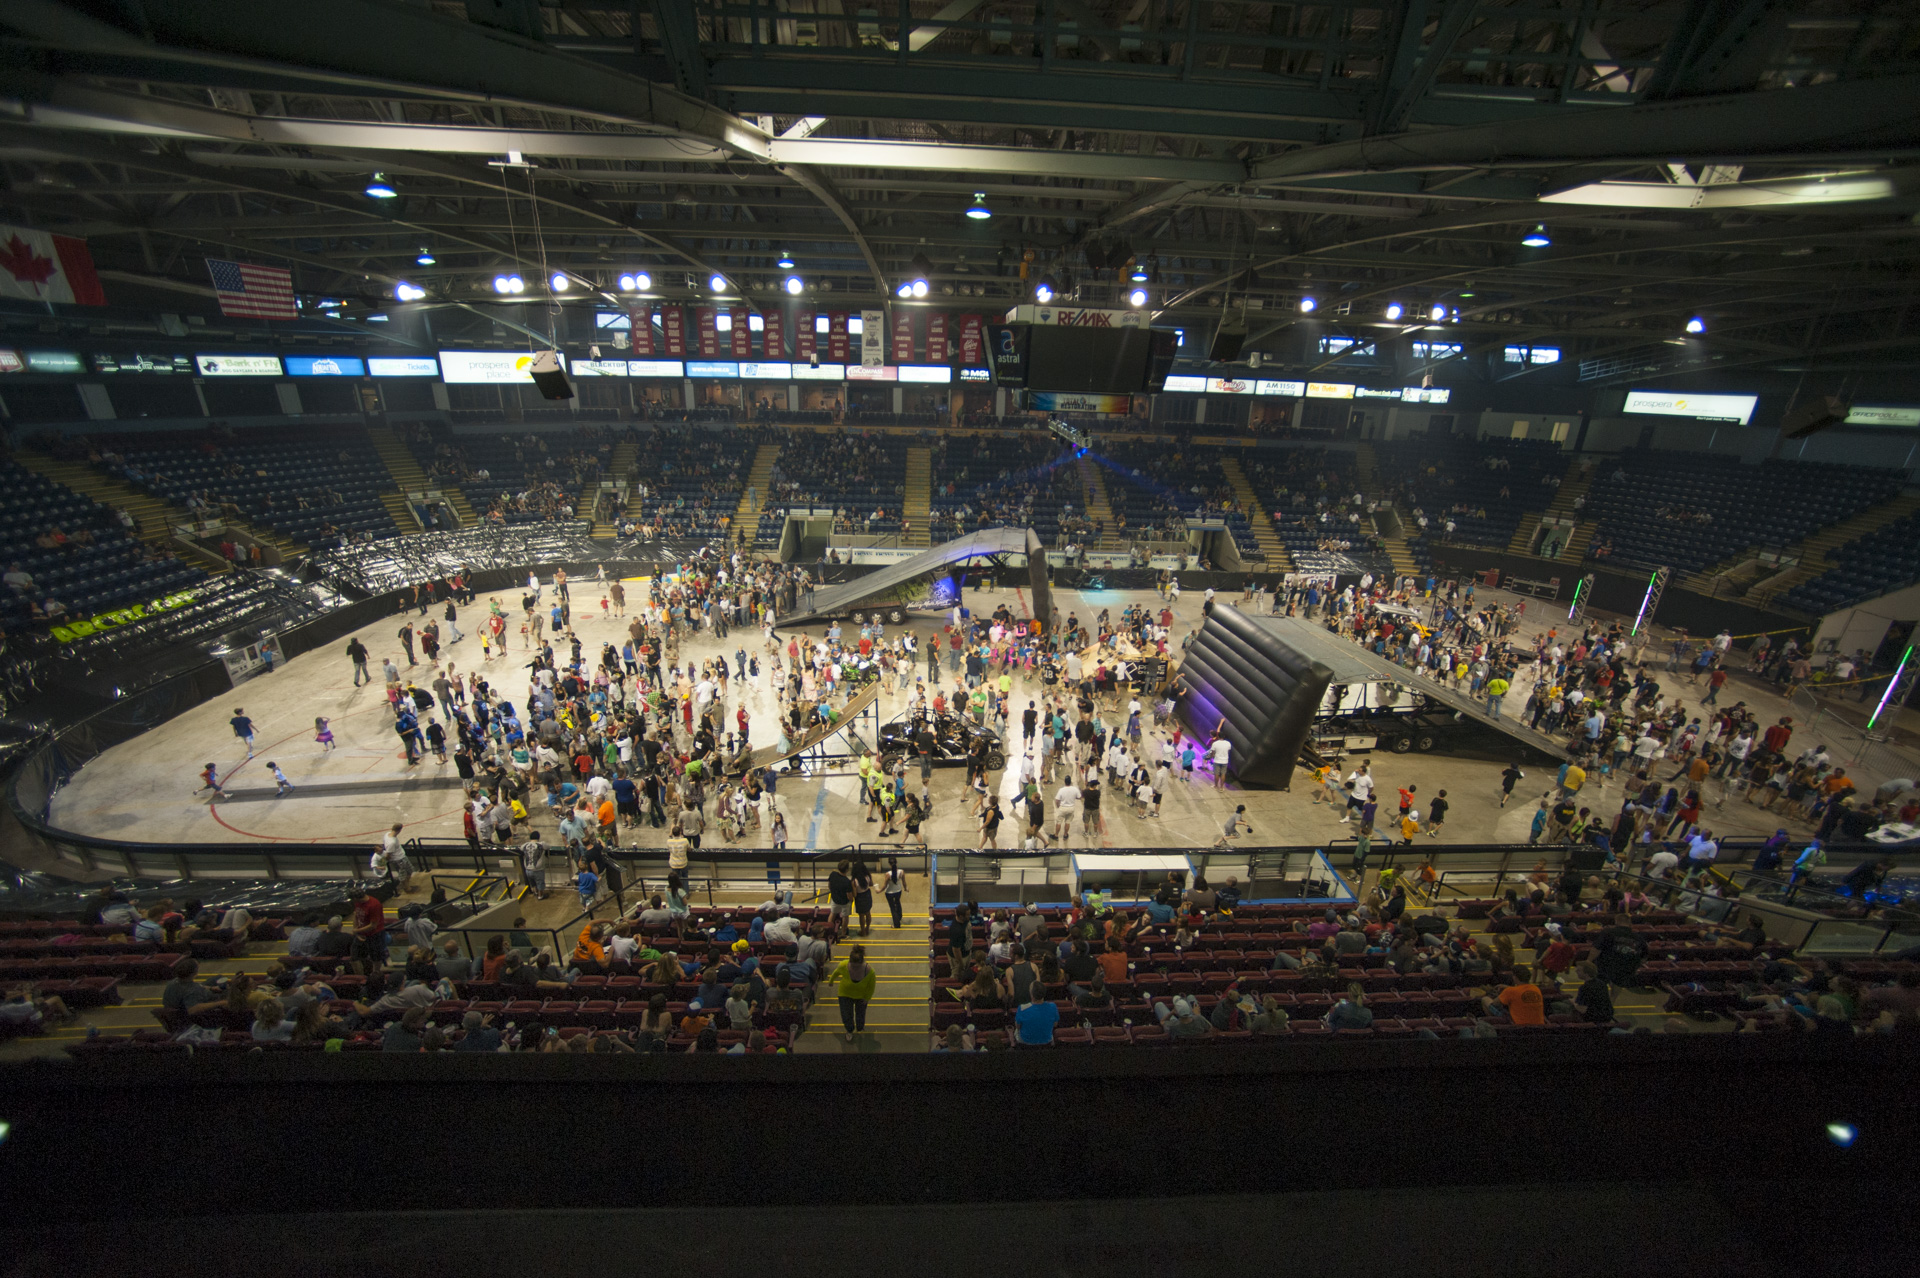 The arena floor for the Freestyle Madness show